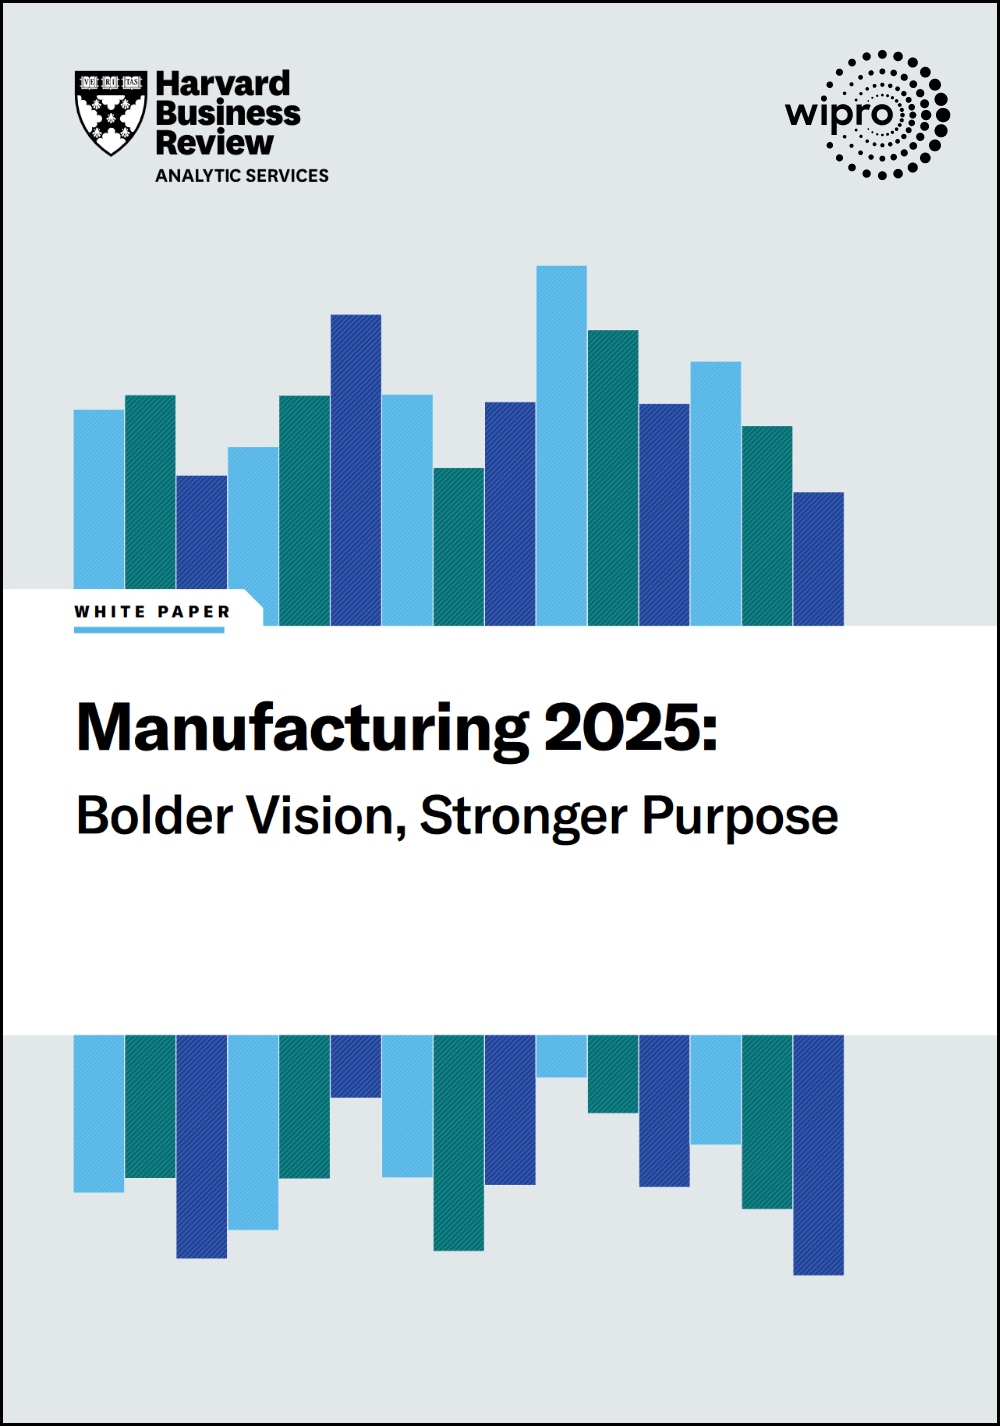 Manufacturing 2025: Bolder Vision, Stronger Purpose A Whitepaper by HBR Analytic Services in association with Wipro 